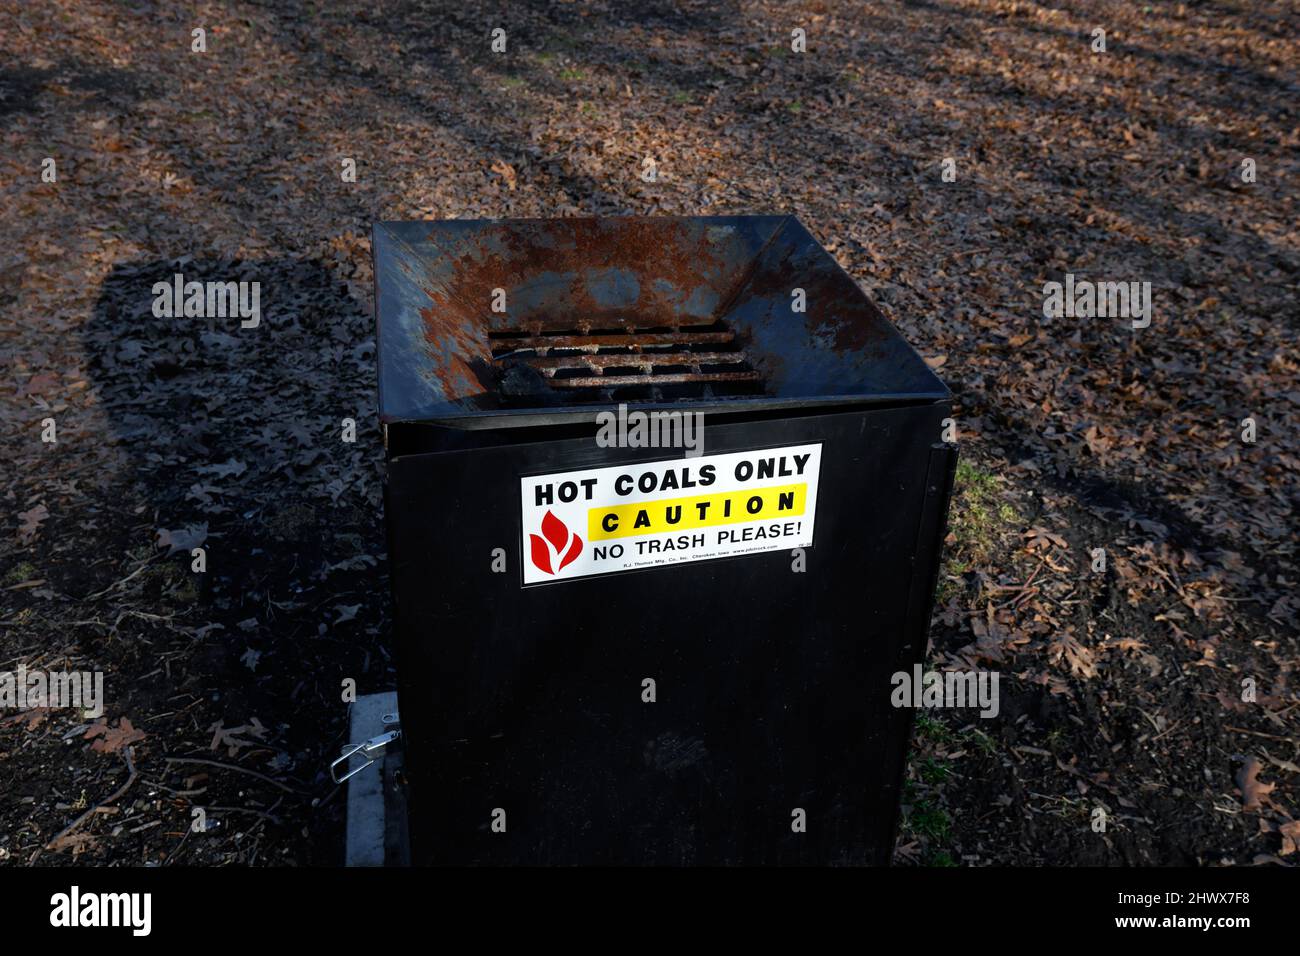 A hot coal disposal bin for the disposal of hot coals, ash and charcoal located at a barbeque and picnicing area of a public park in Brooklyn, NY. Stock Photo